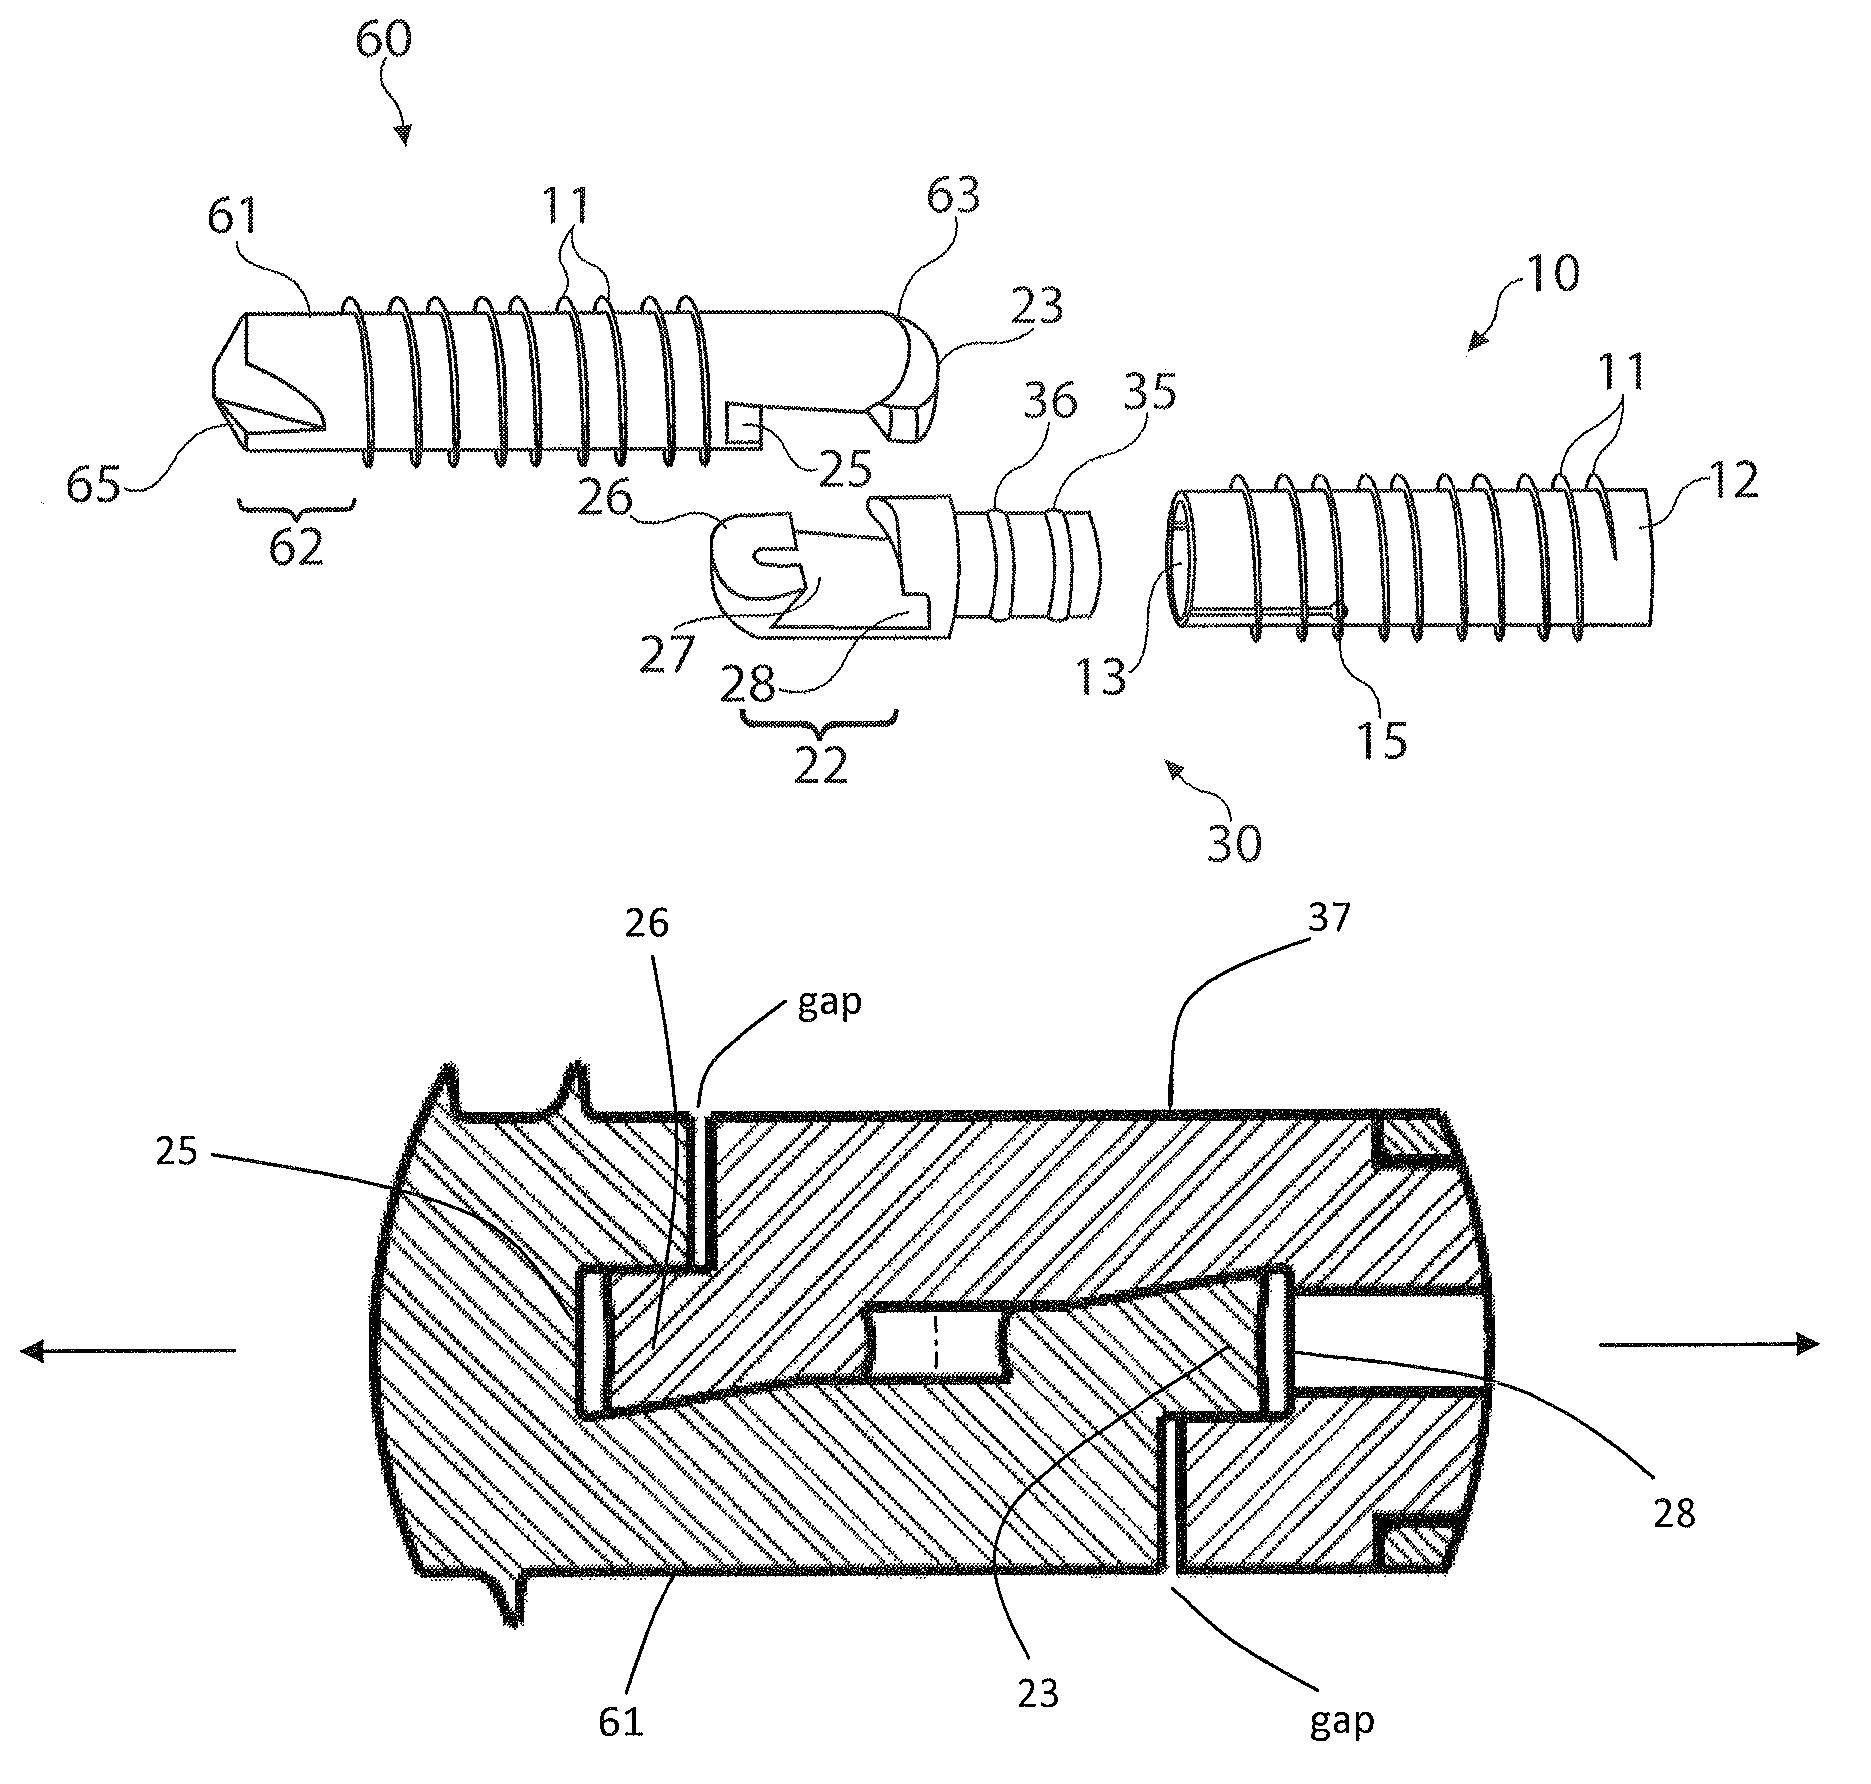 Distal interphalangeal fusion method and device